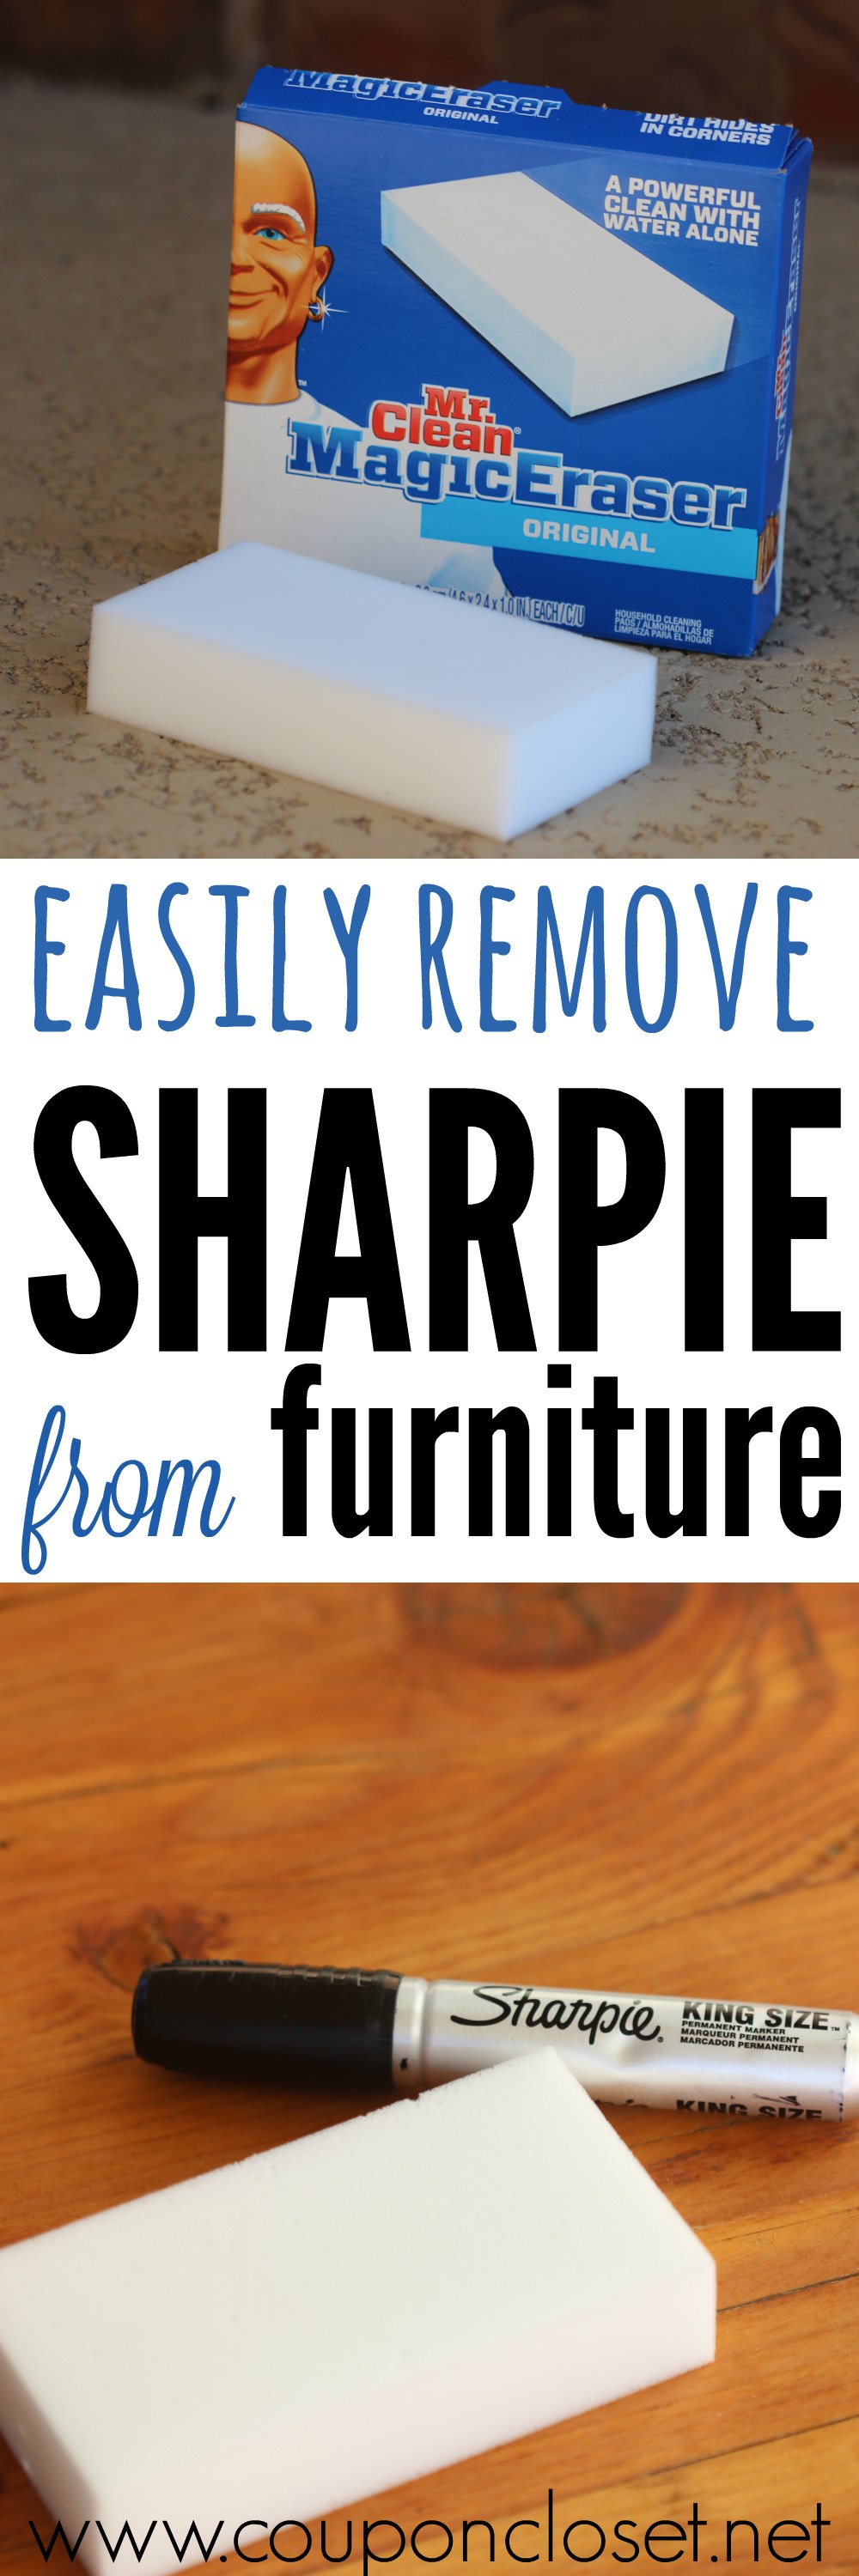 how to remove permanent marker from furniture - any sharpies